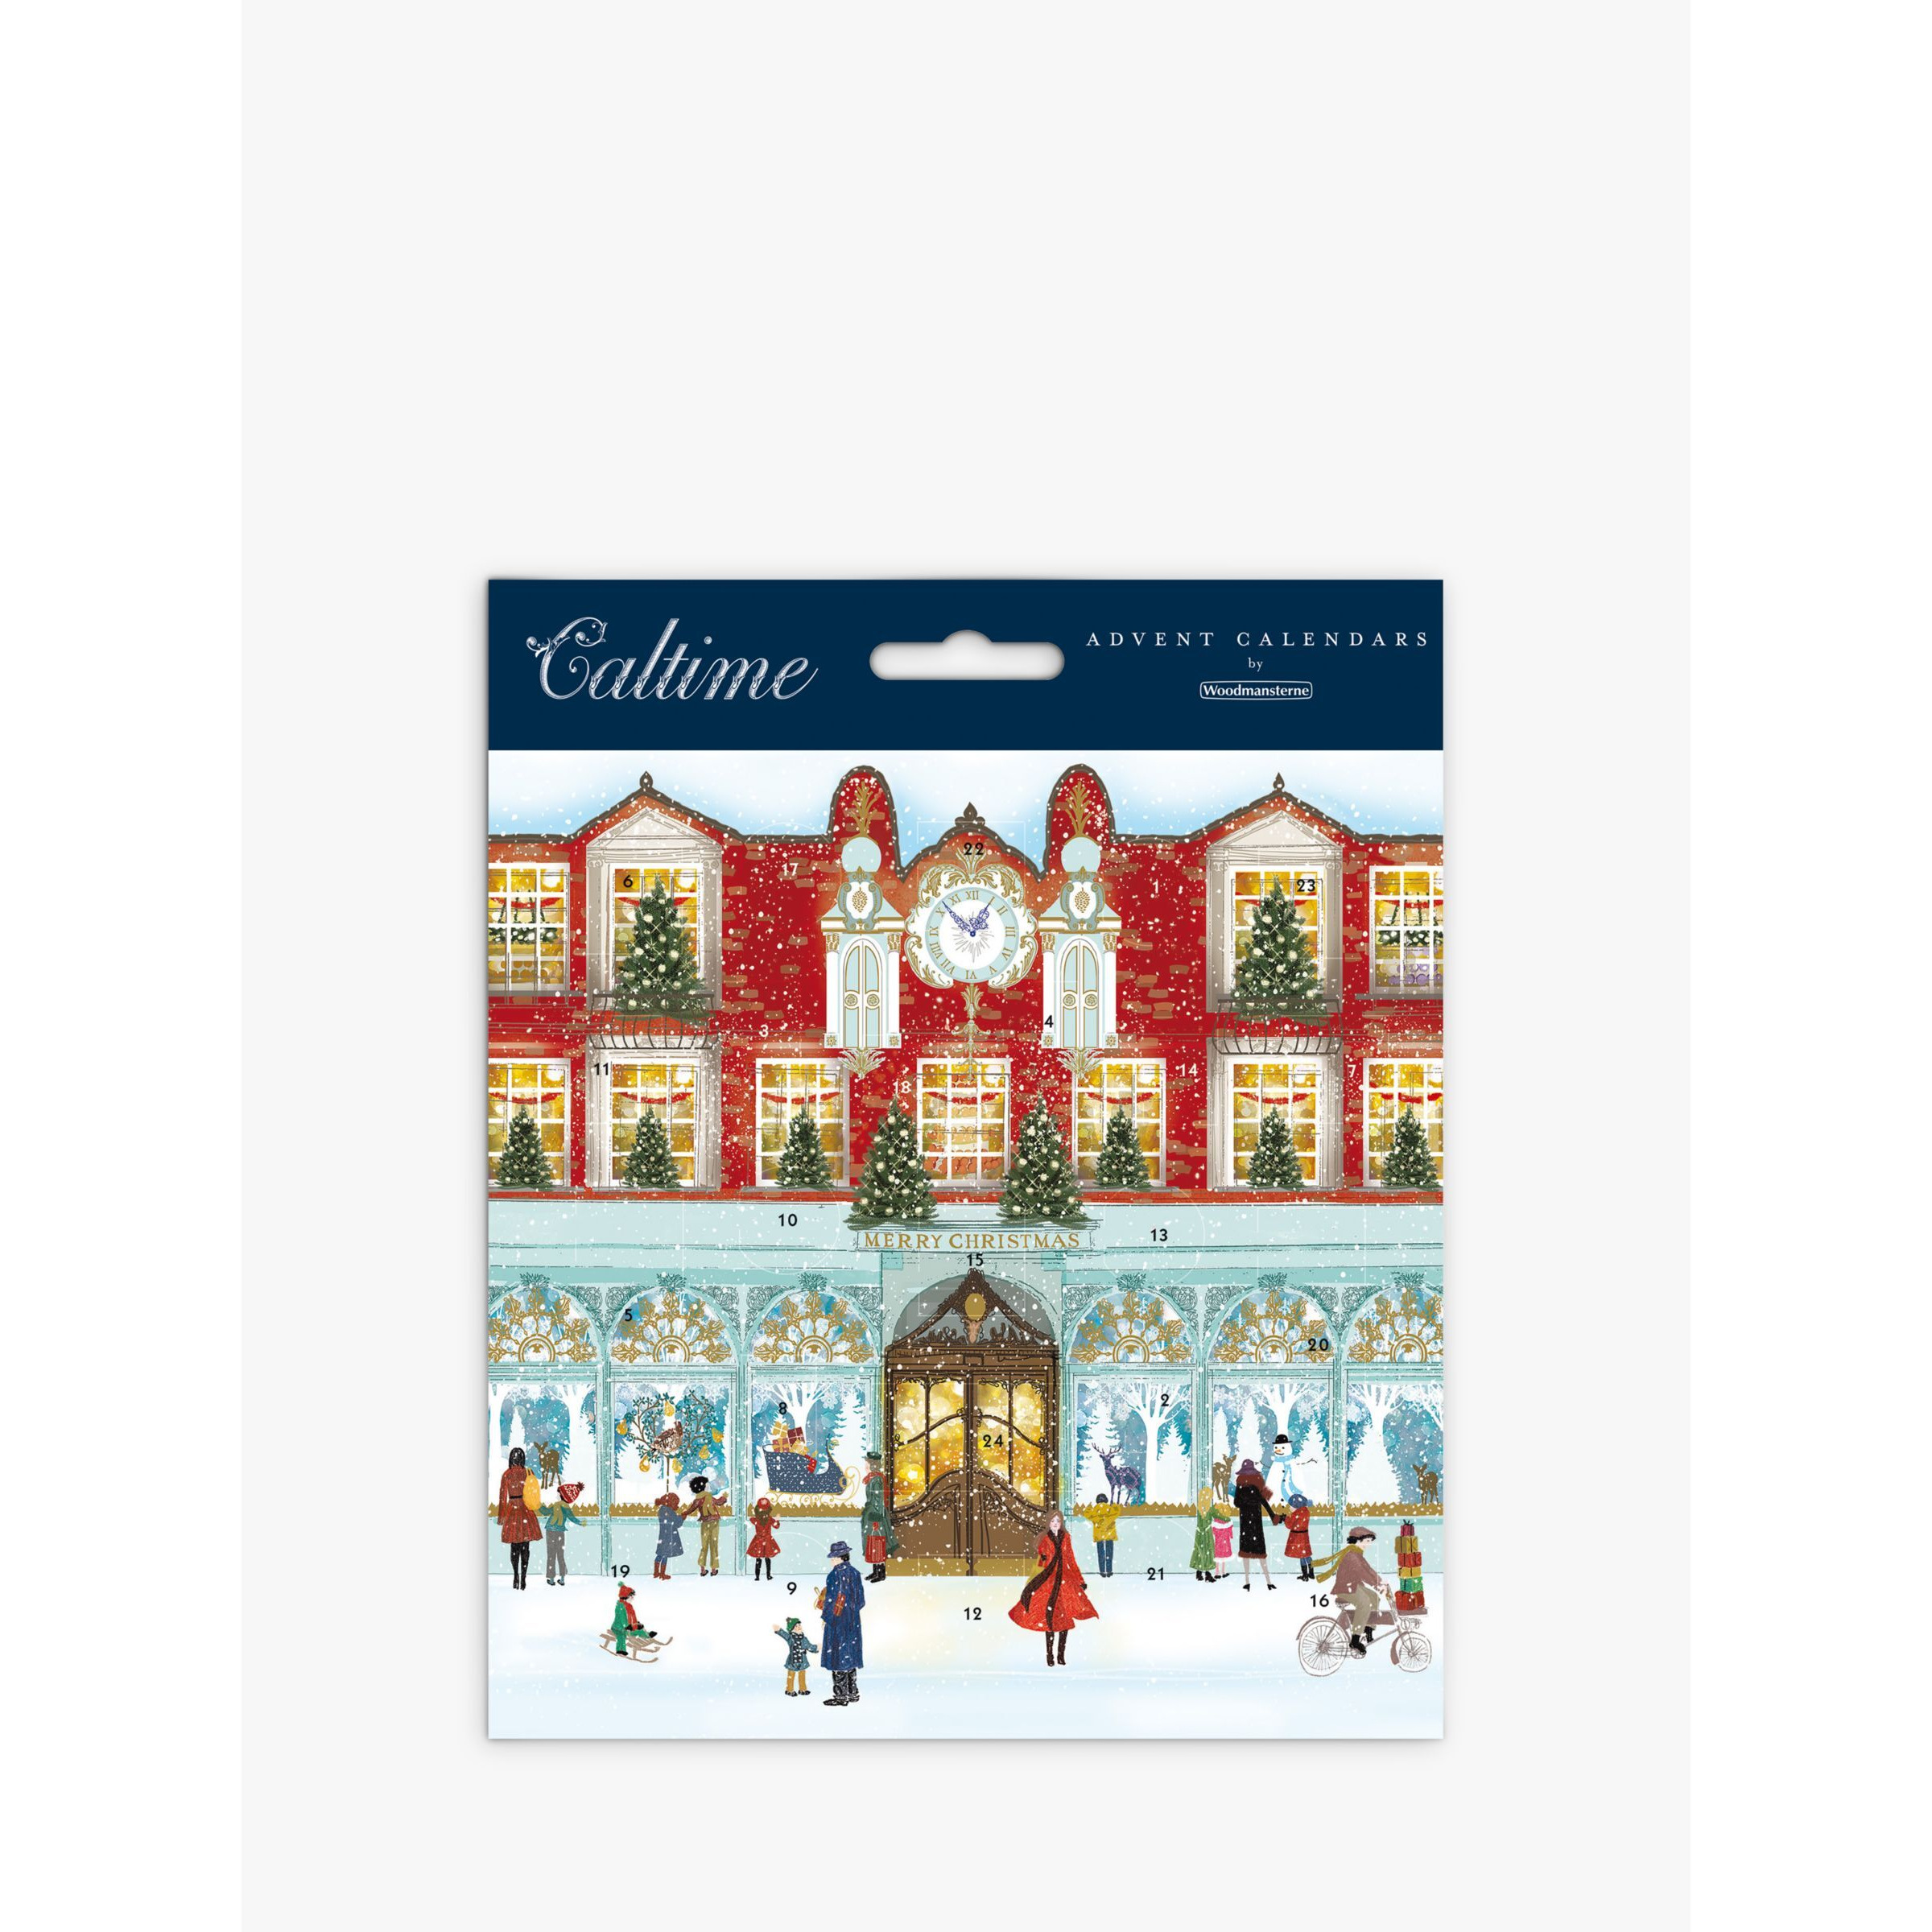 Woodmansterne Christmas is Coming Advent Calendar Card